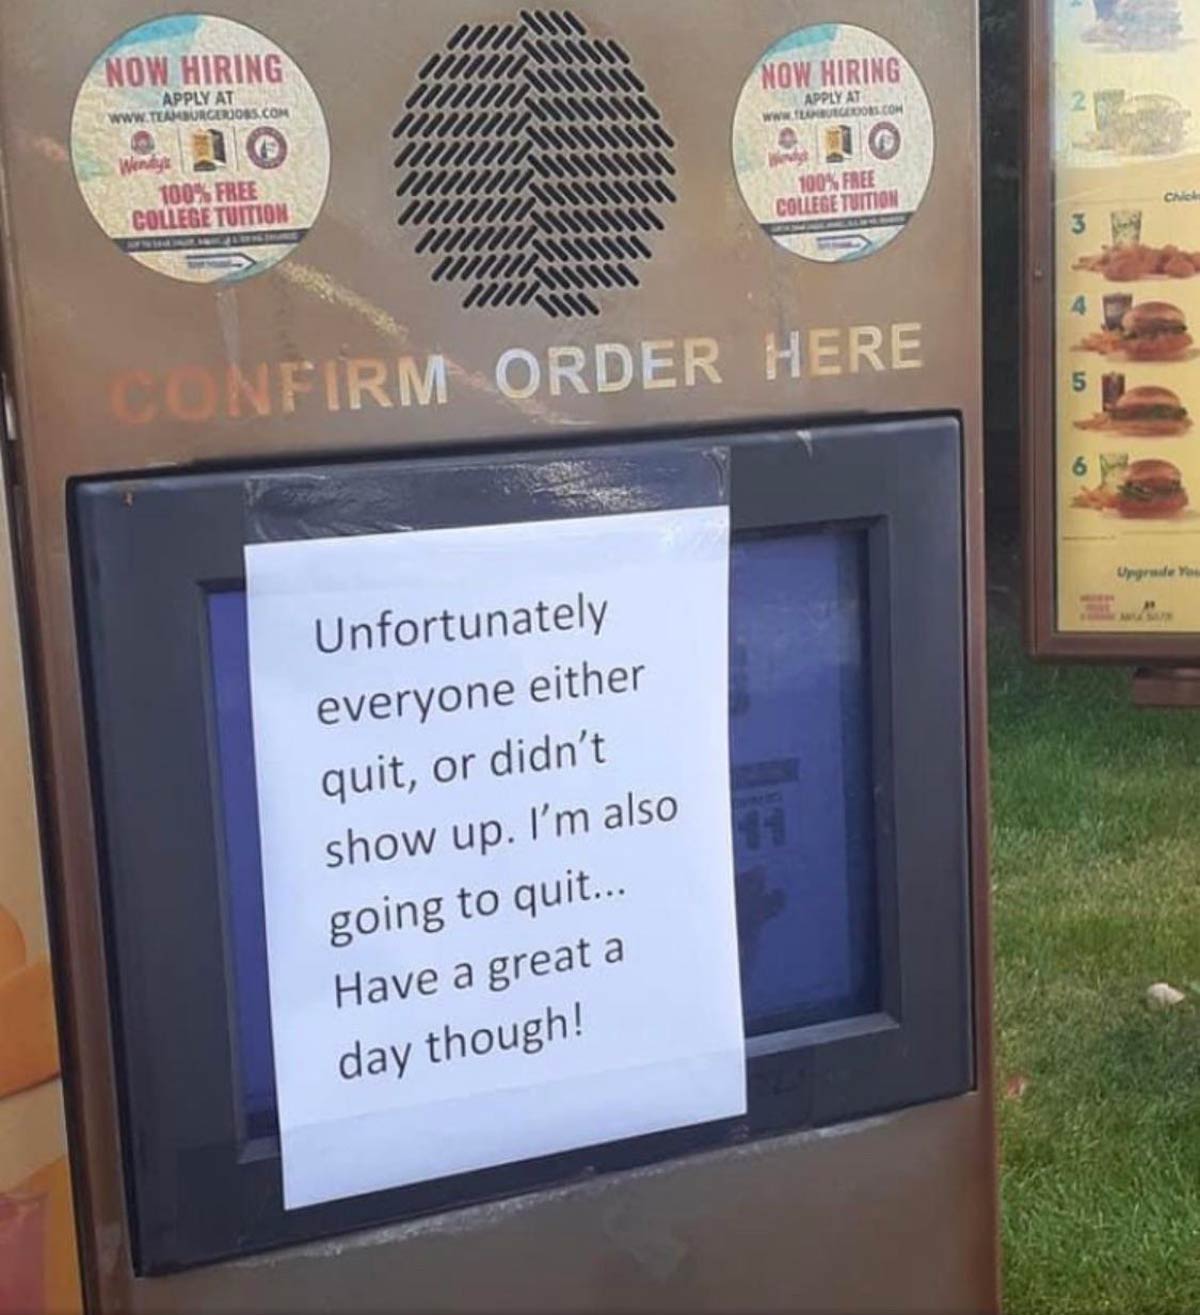 Local Wendy’s meets its end